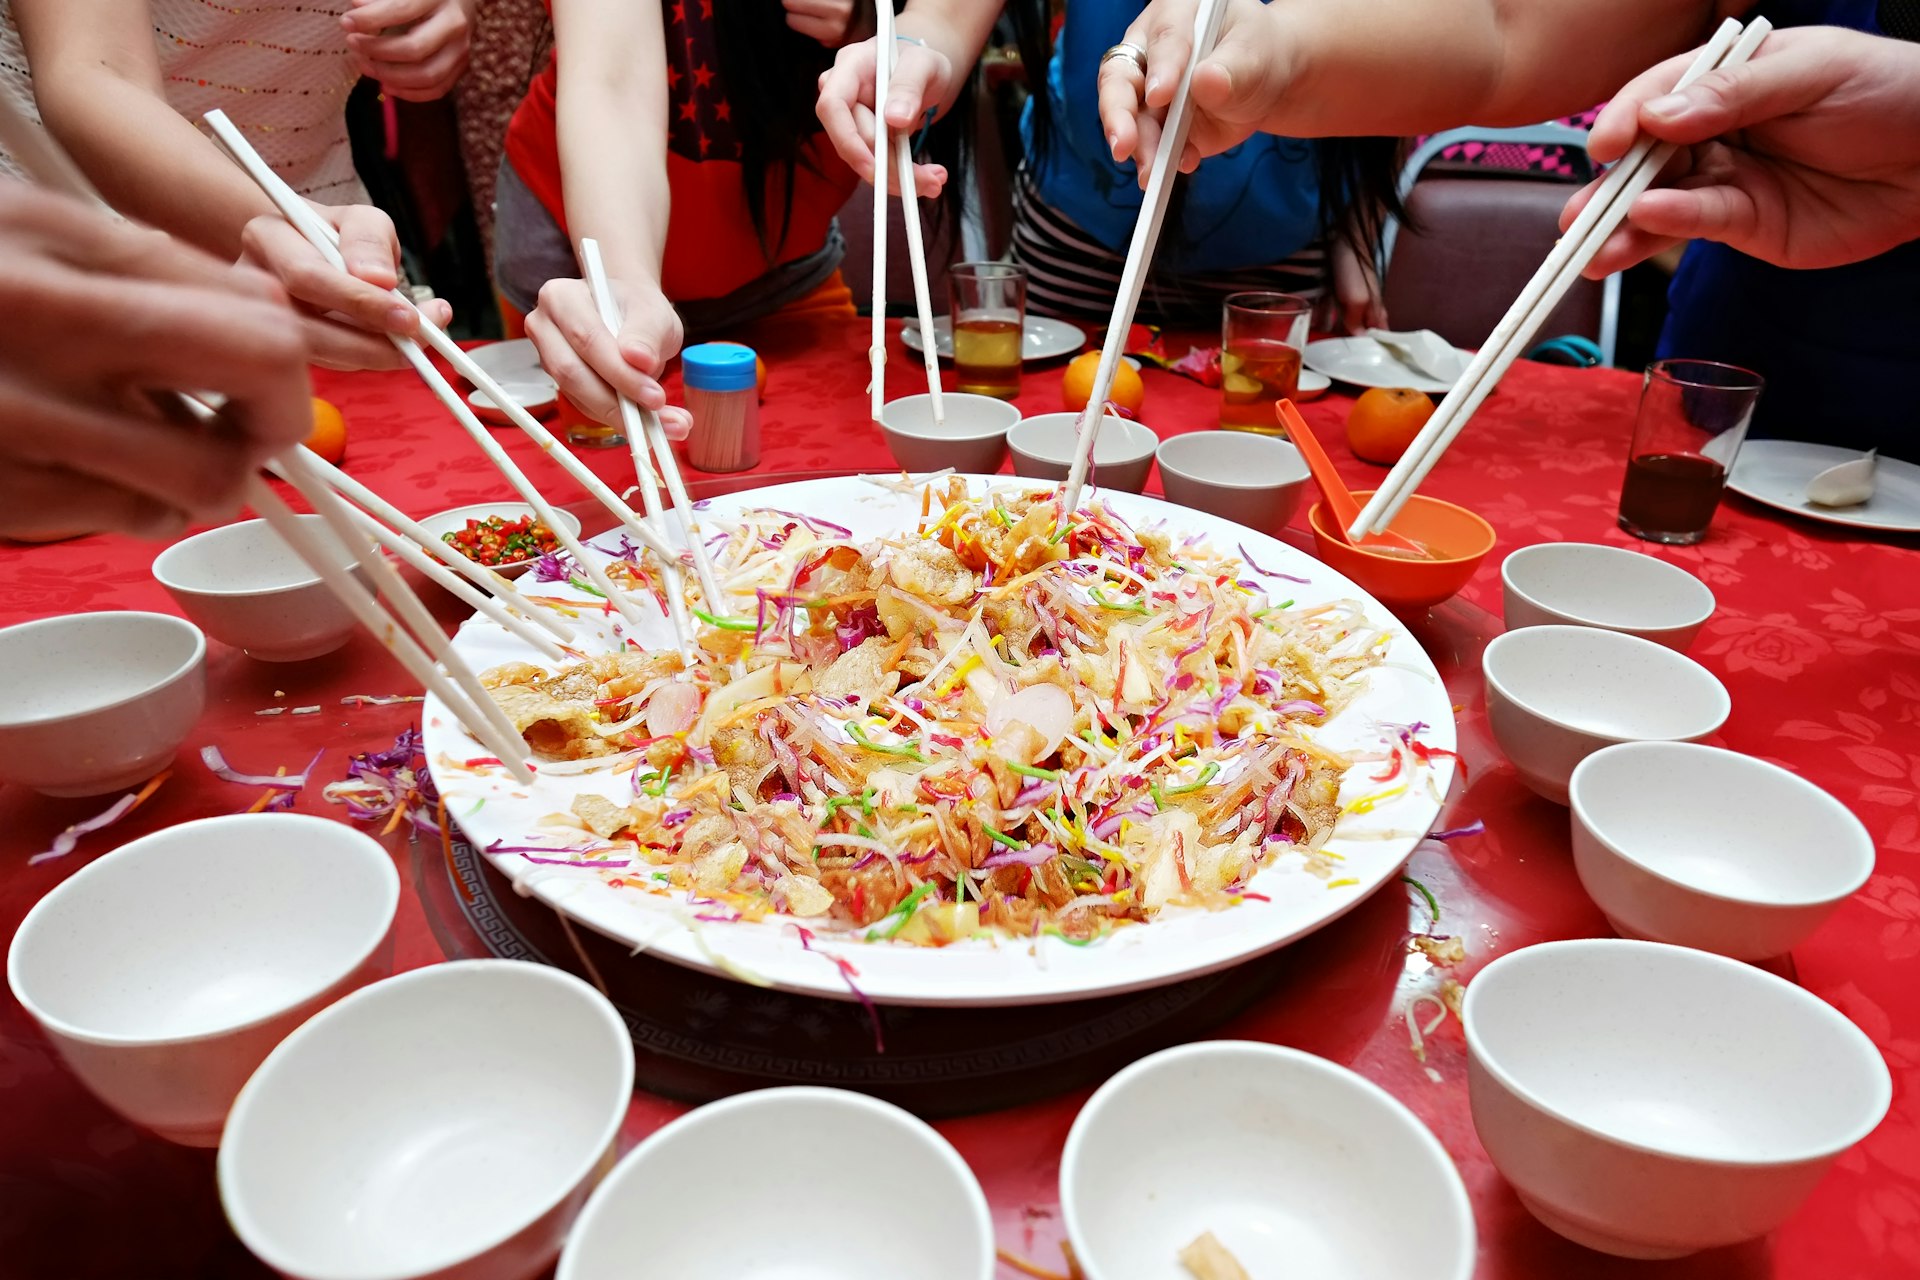 Bowls, chopsticks and eager diners about to eat a traditional Chinese meal